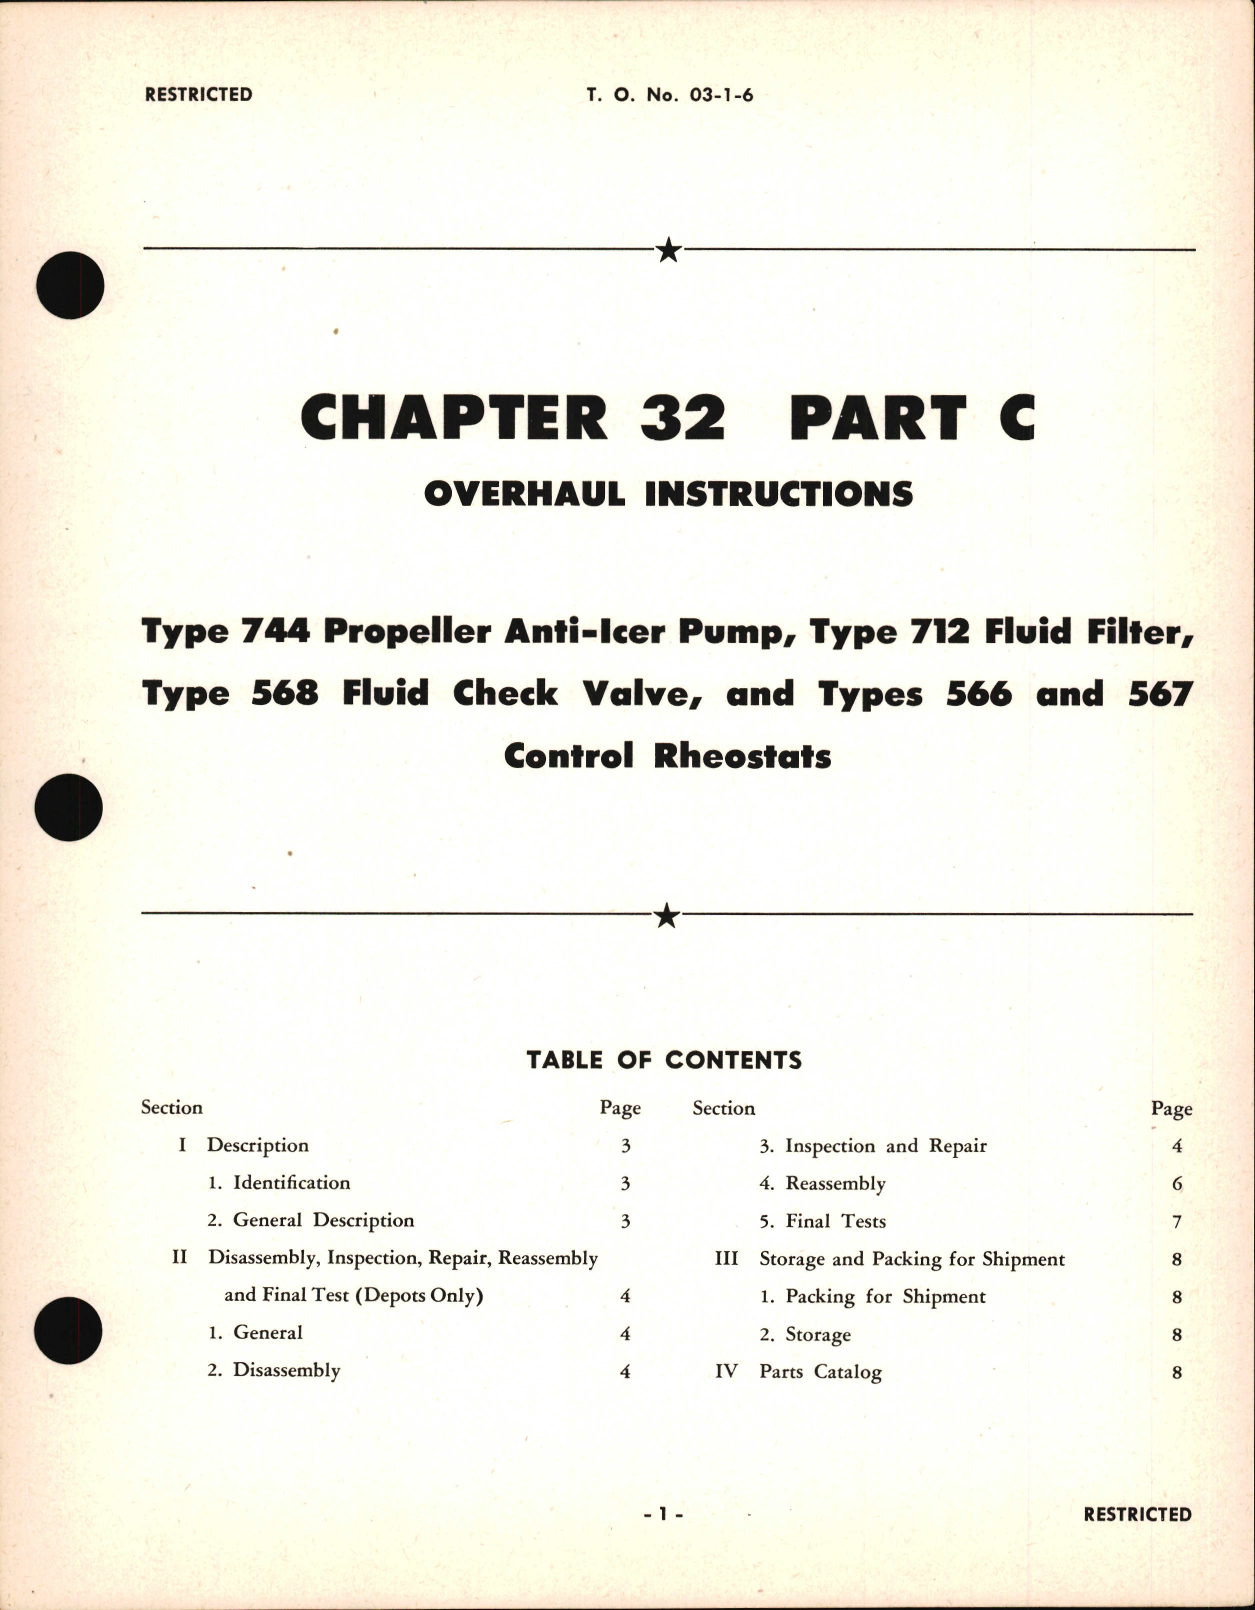 Sample page 1 from AirCorps Library document: Overhaul Instructions for Propeller Anti-Icer Pump, Fluid Filter, Fluid Check Valve and Control Rheostats, Chapter 32 Part C